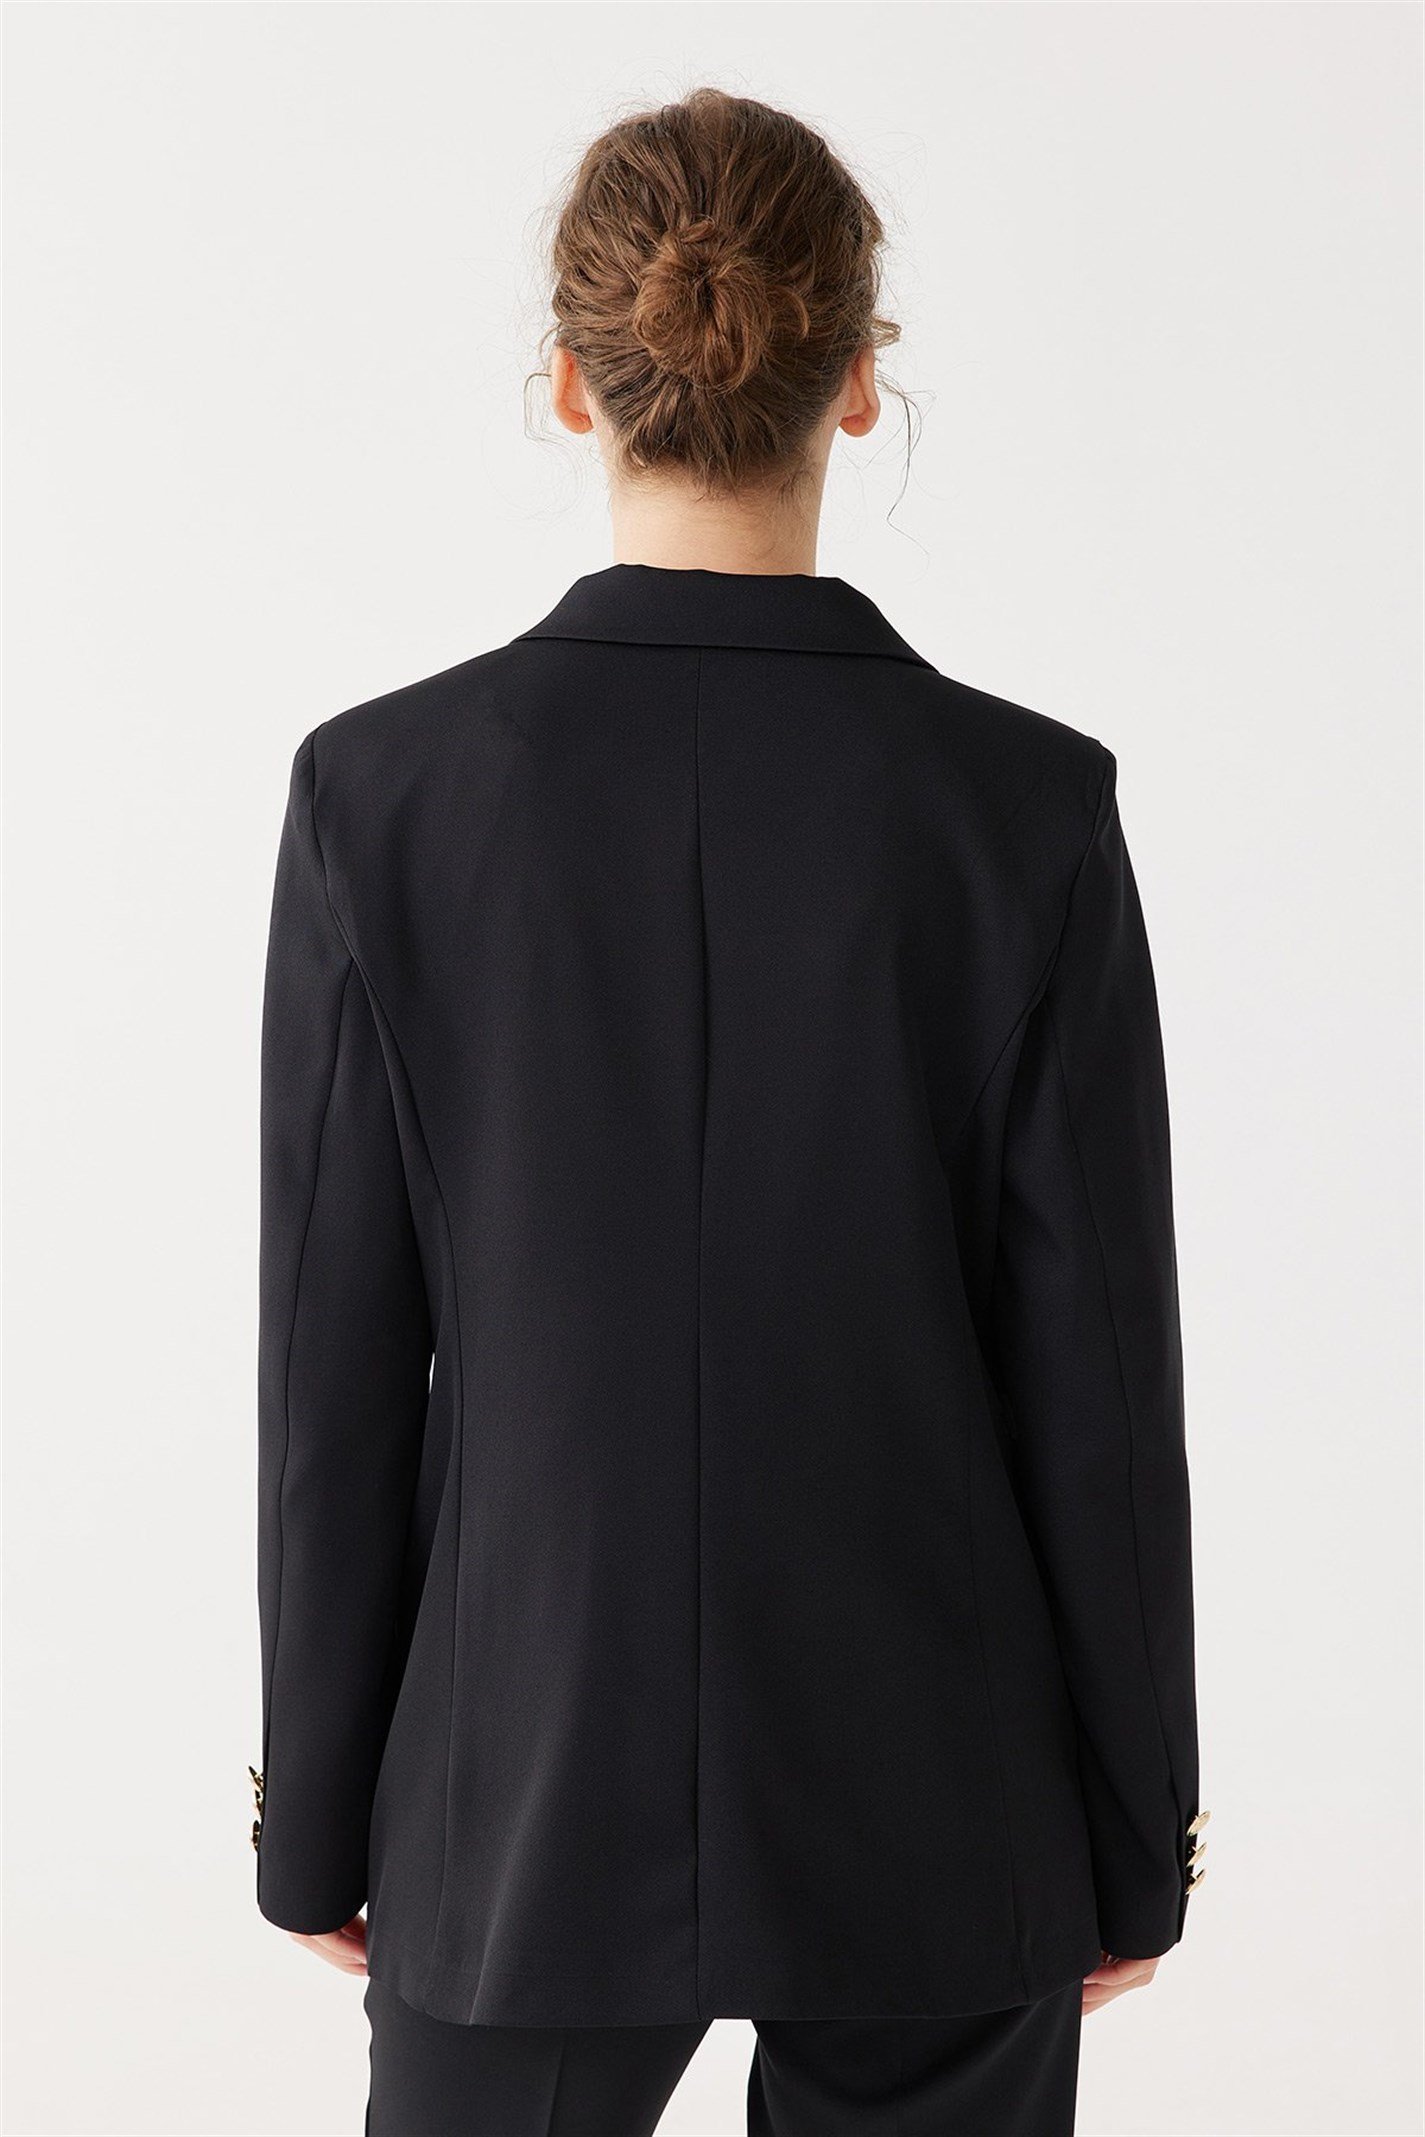 Black Gold Button Blazer Jacket | Suud Collection